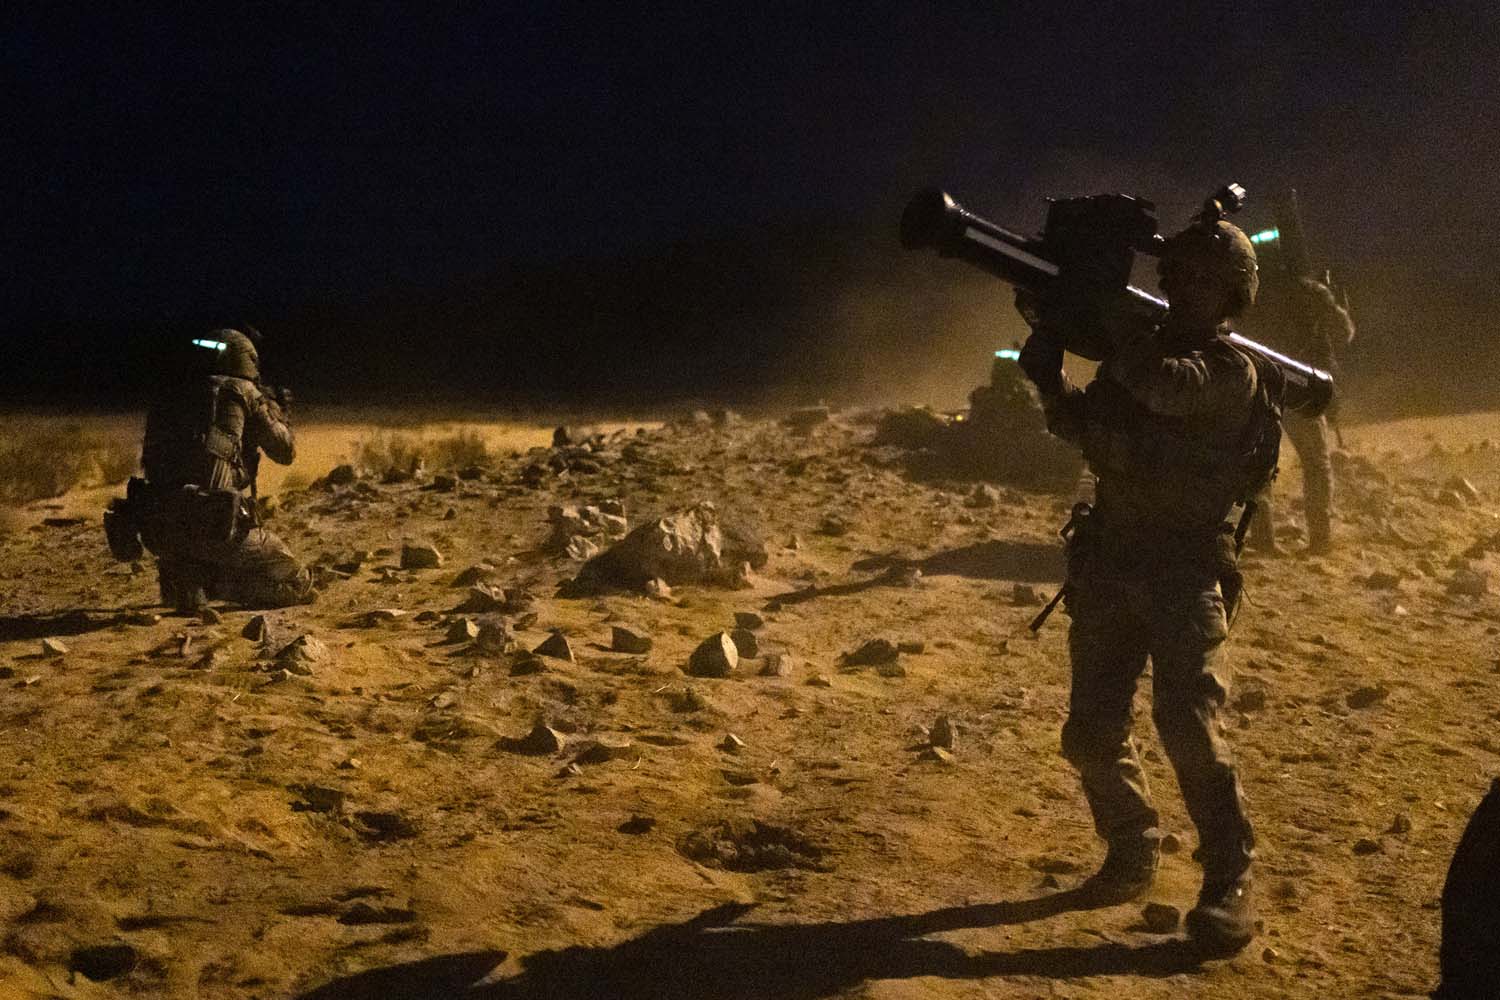 Royal Marines Air Defence Troop of 30 Commando in action in the desert